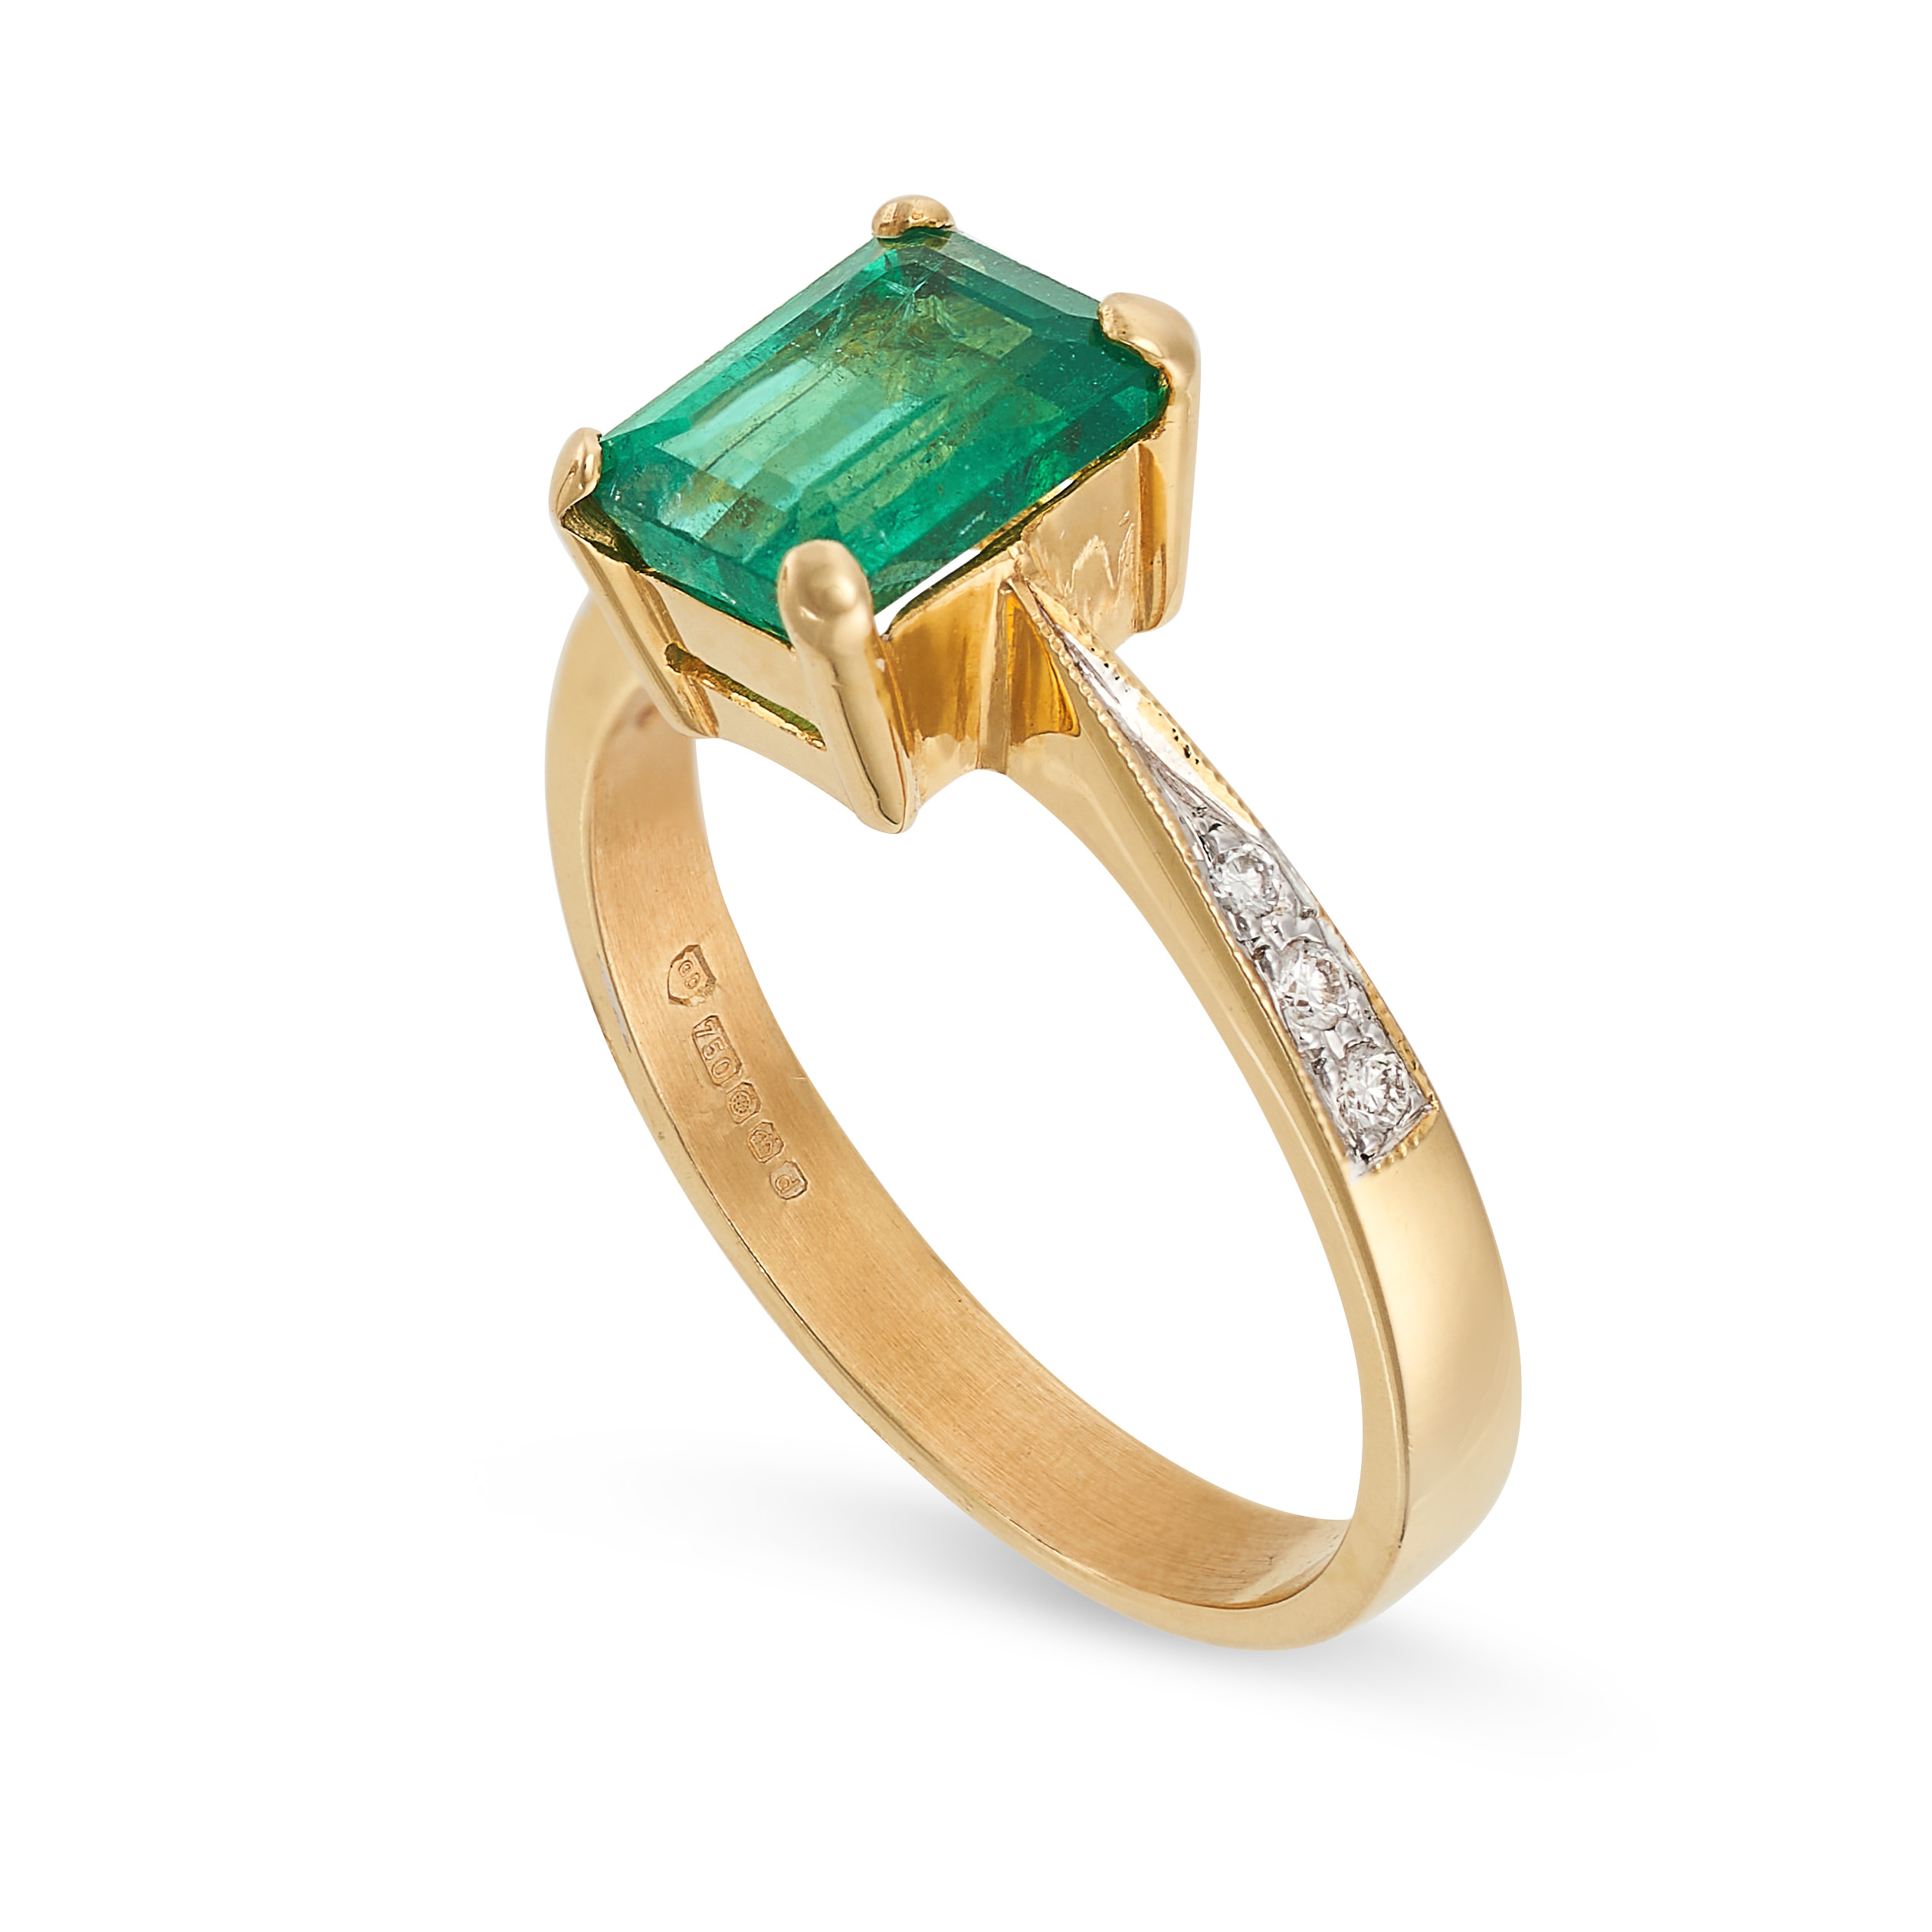 AN EMERALD AND DIAMOND RING in 18ct yellow gold, set with an emerald cut emerald of 1.23 carats, the - Image 2 of 2